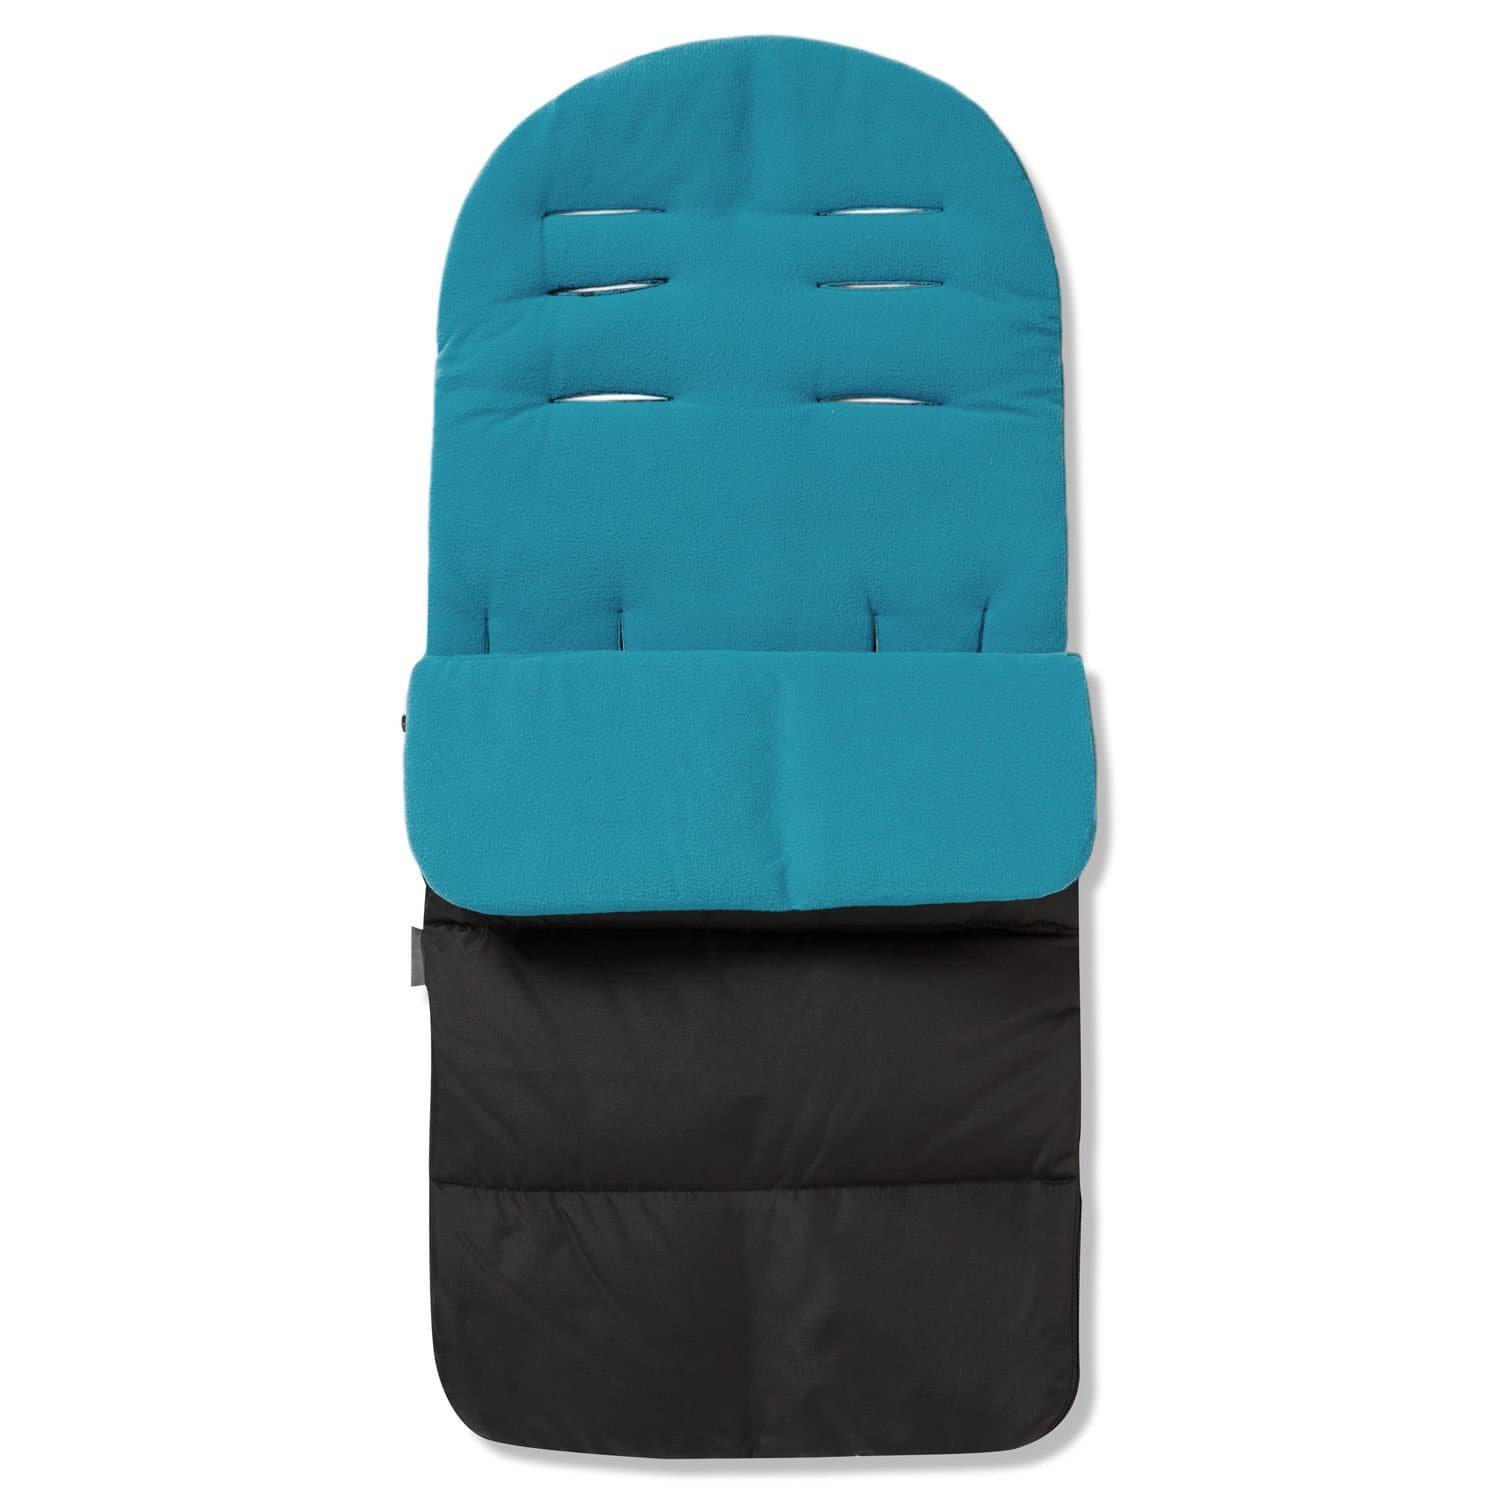 Premium Footmuff / Cosy Toes Compatible with Brevi - For Your Little One